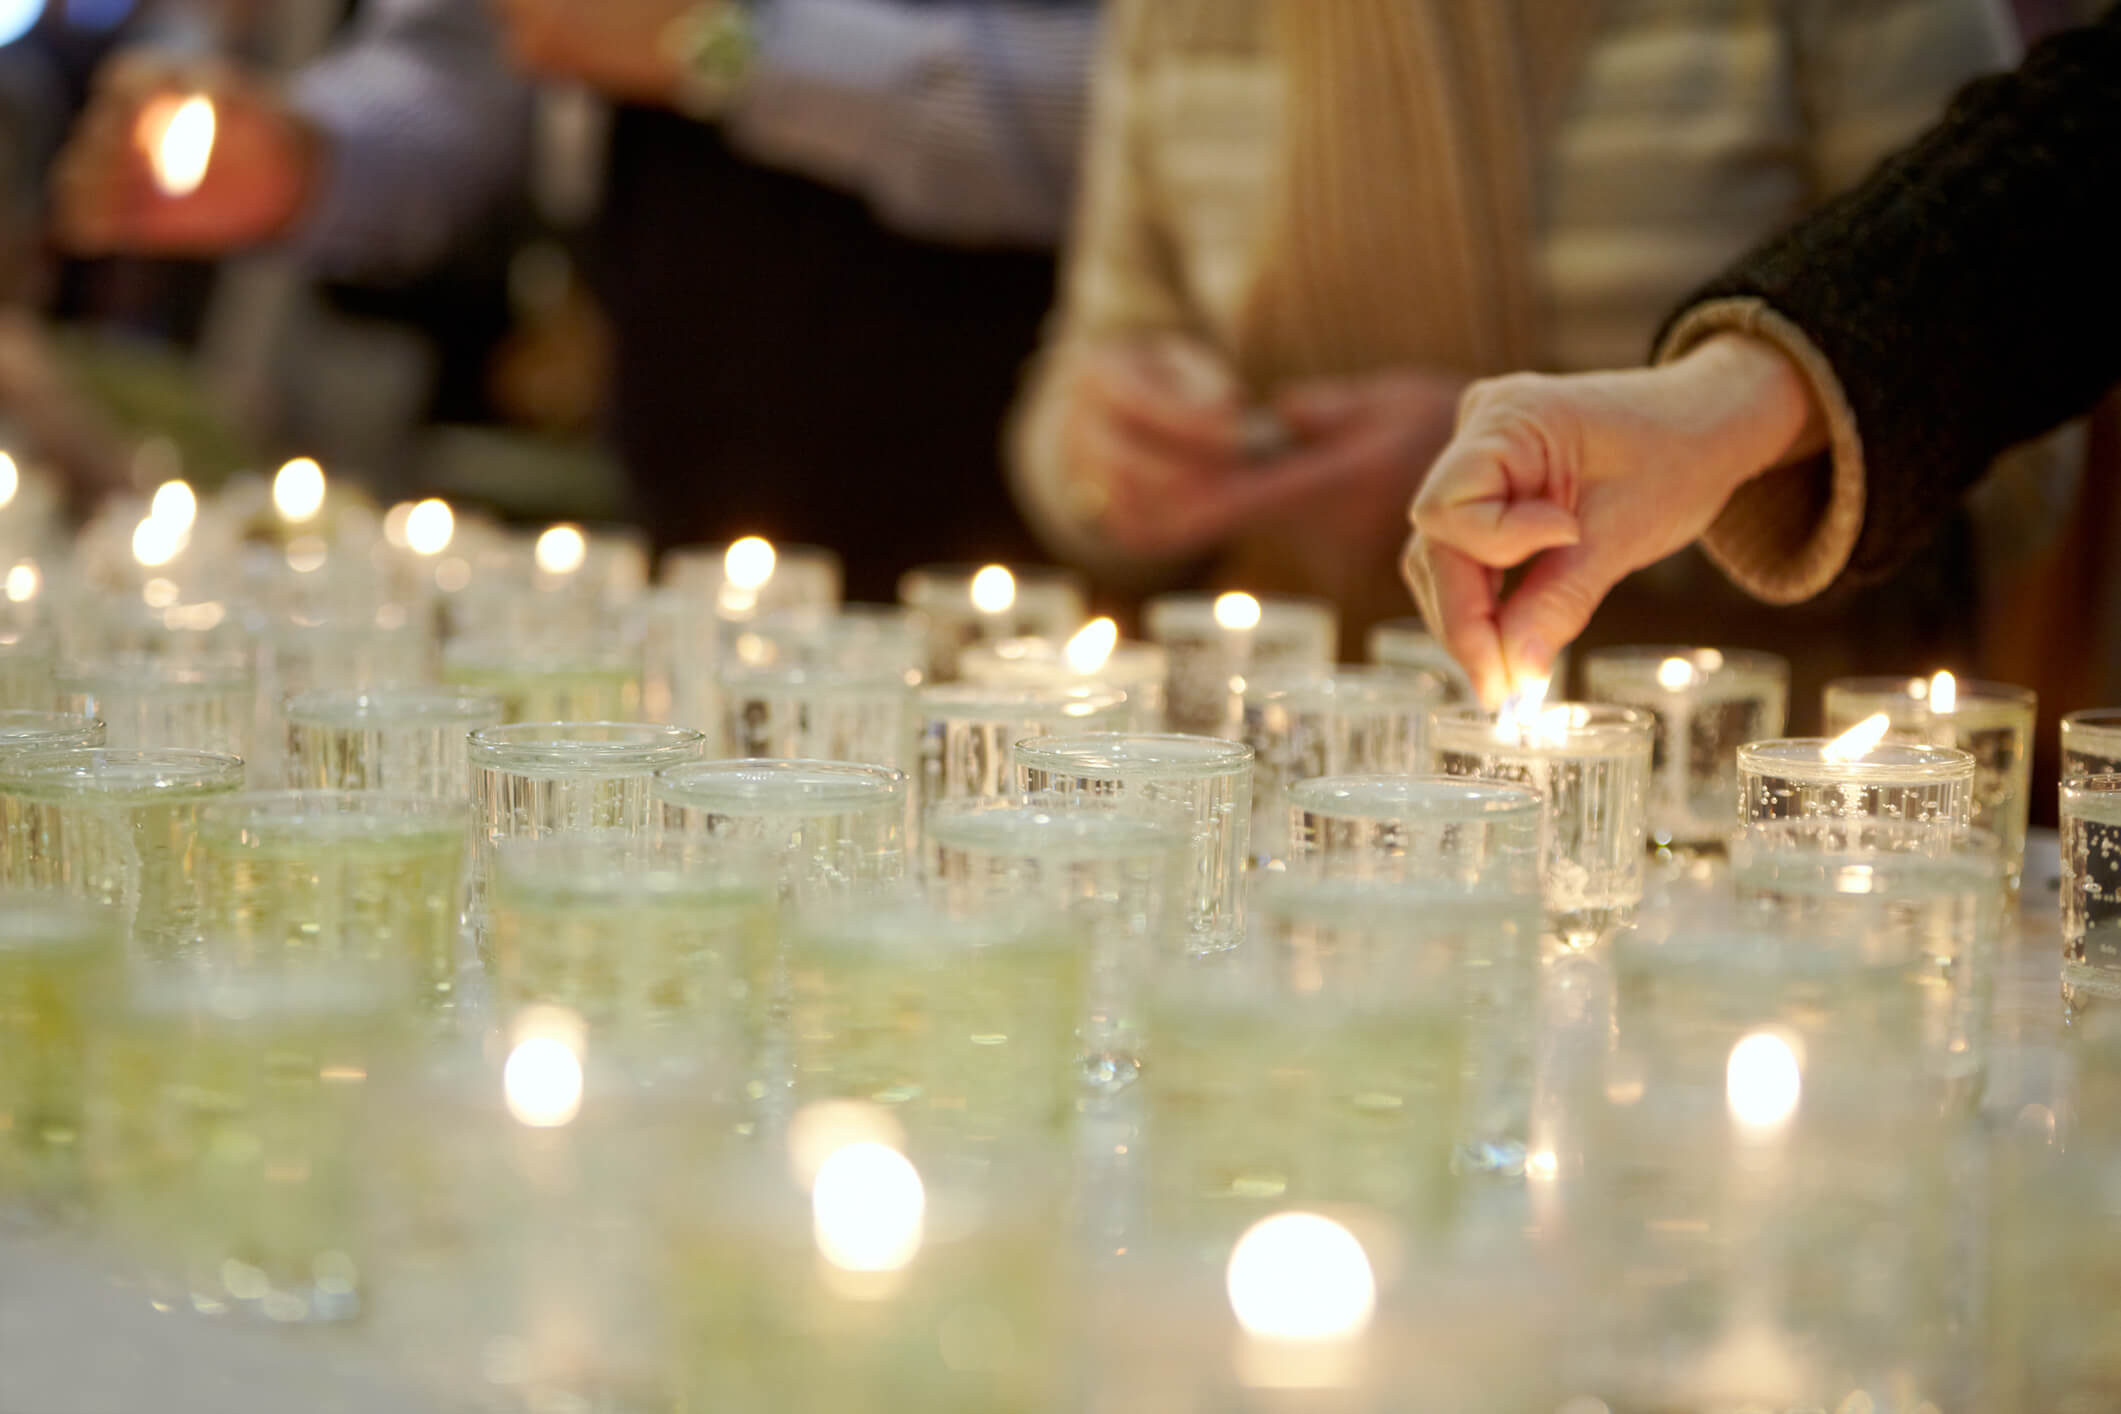 Lighting candles as part of traditional funeral service